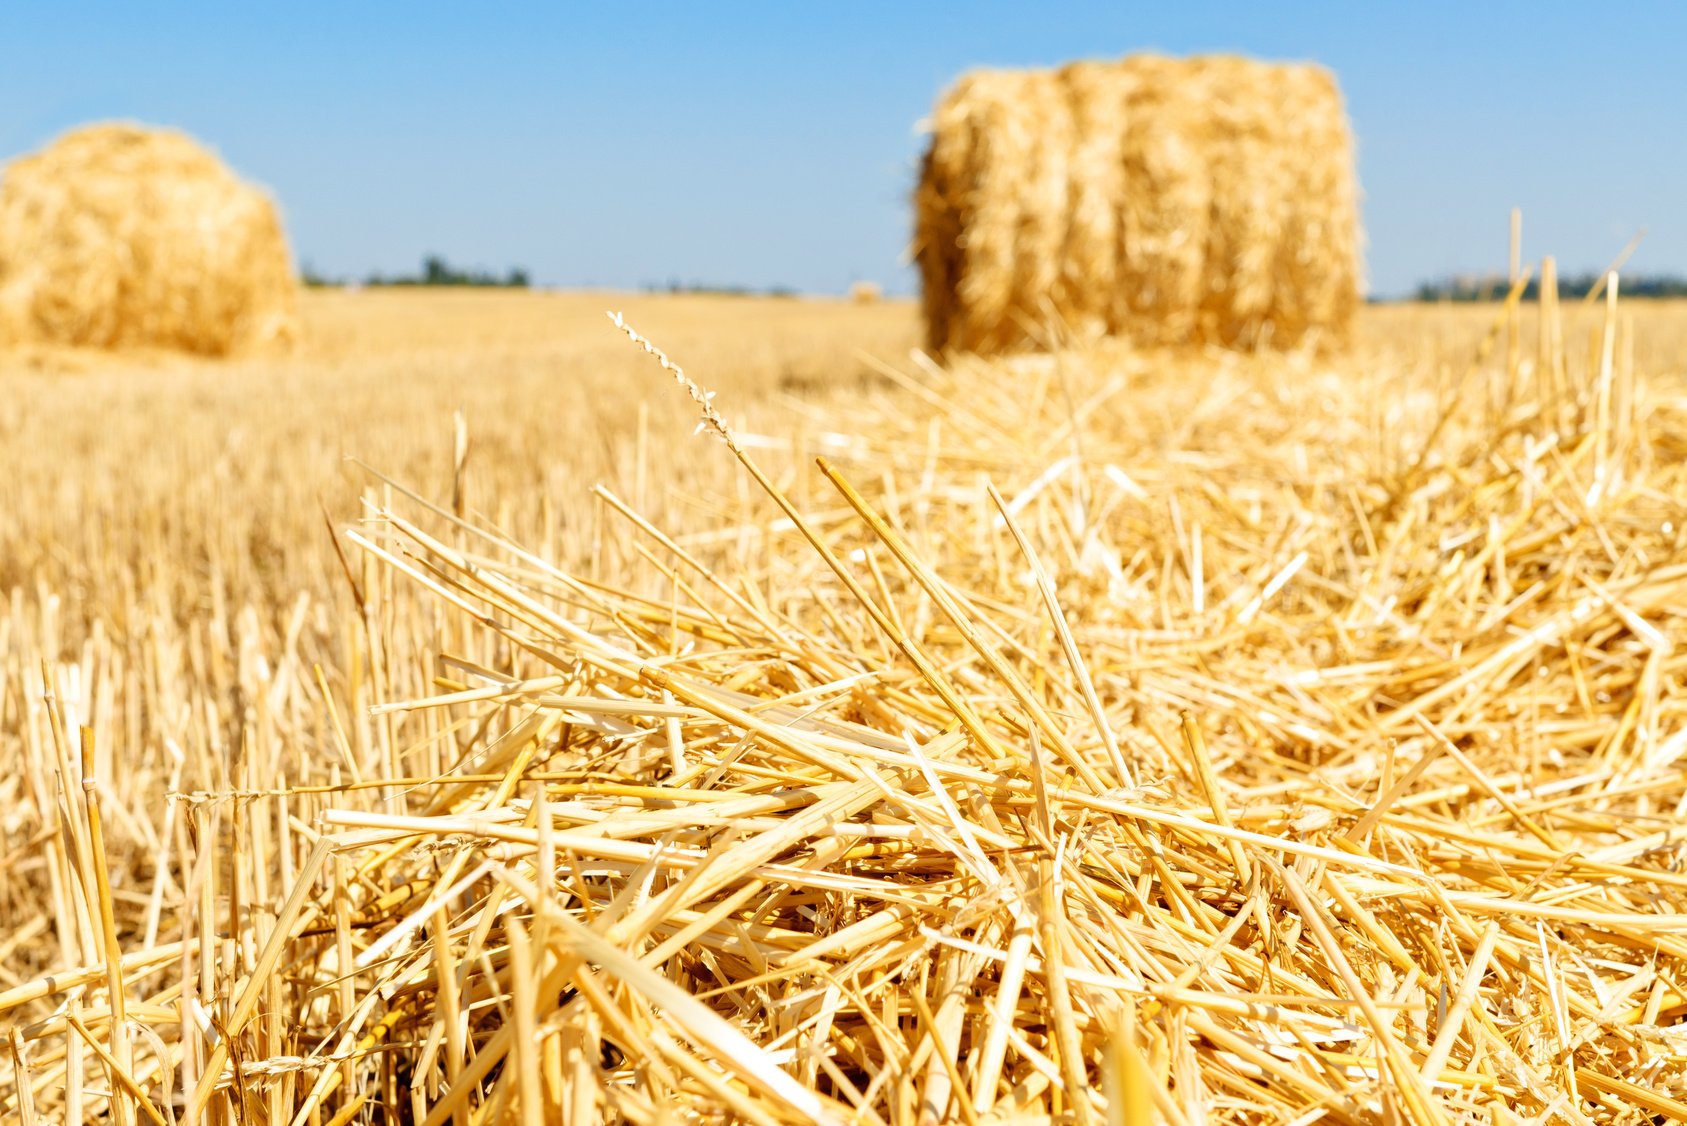 How To Control Moisture Content In Hay Bales